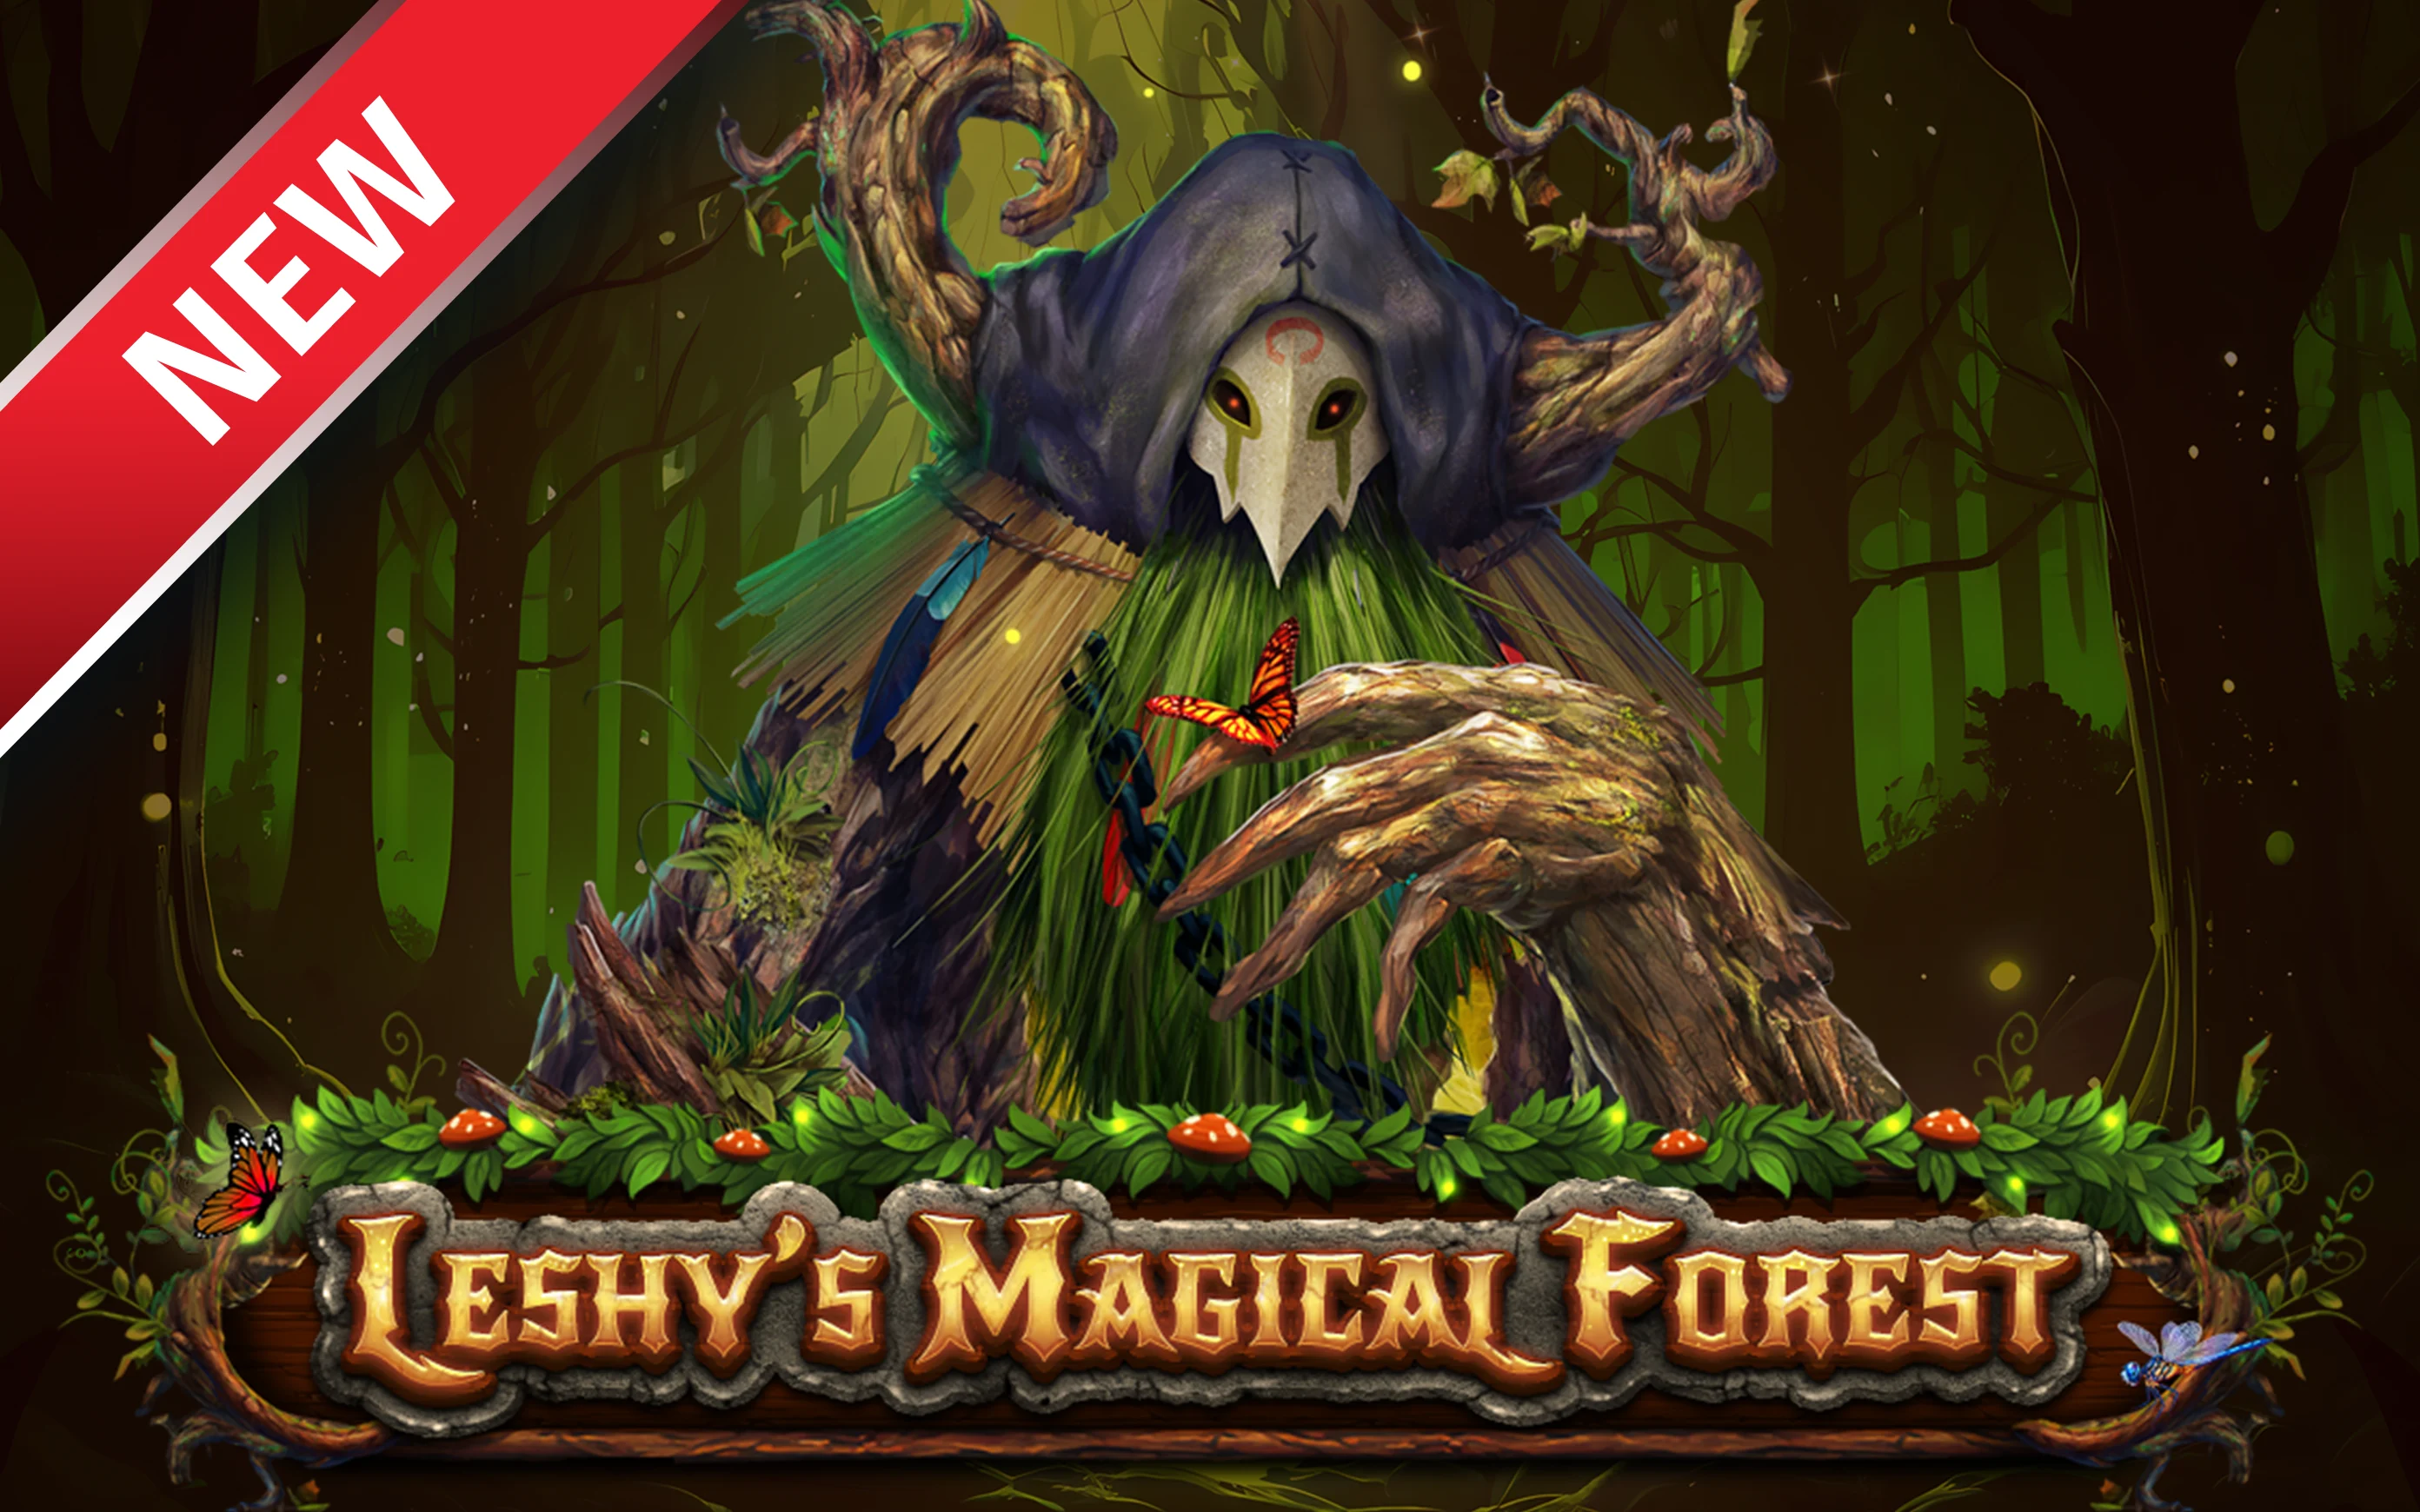 Play Leshy’s Magical Forest on Starcasino.be online casino